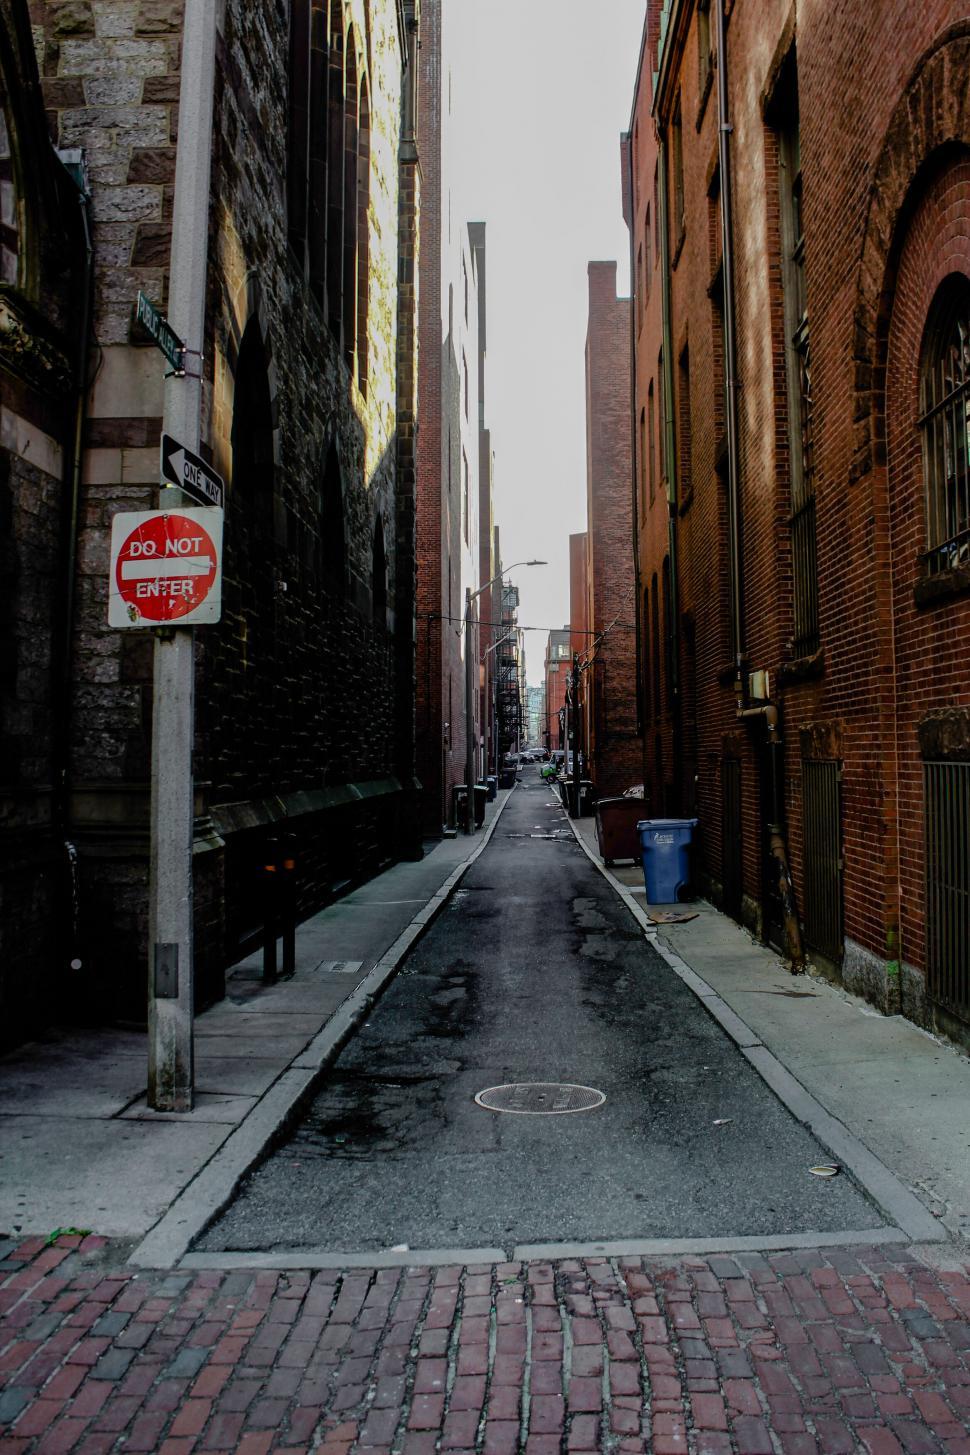 Free Image of Desolate street view with vintage brick buildings and signs 